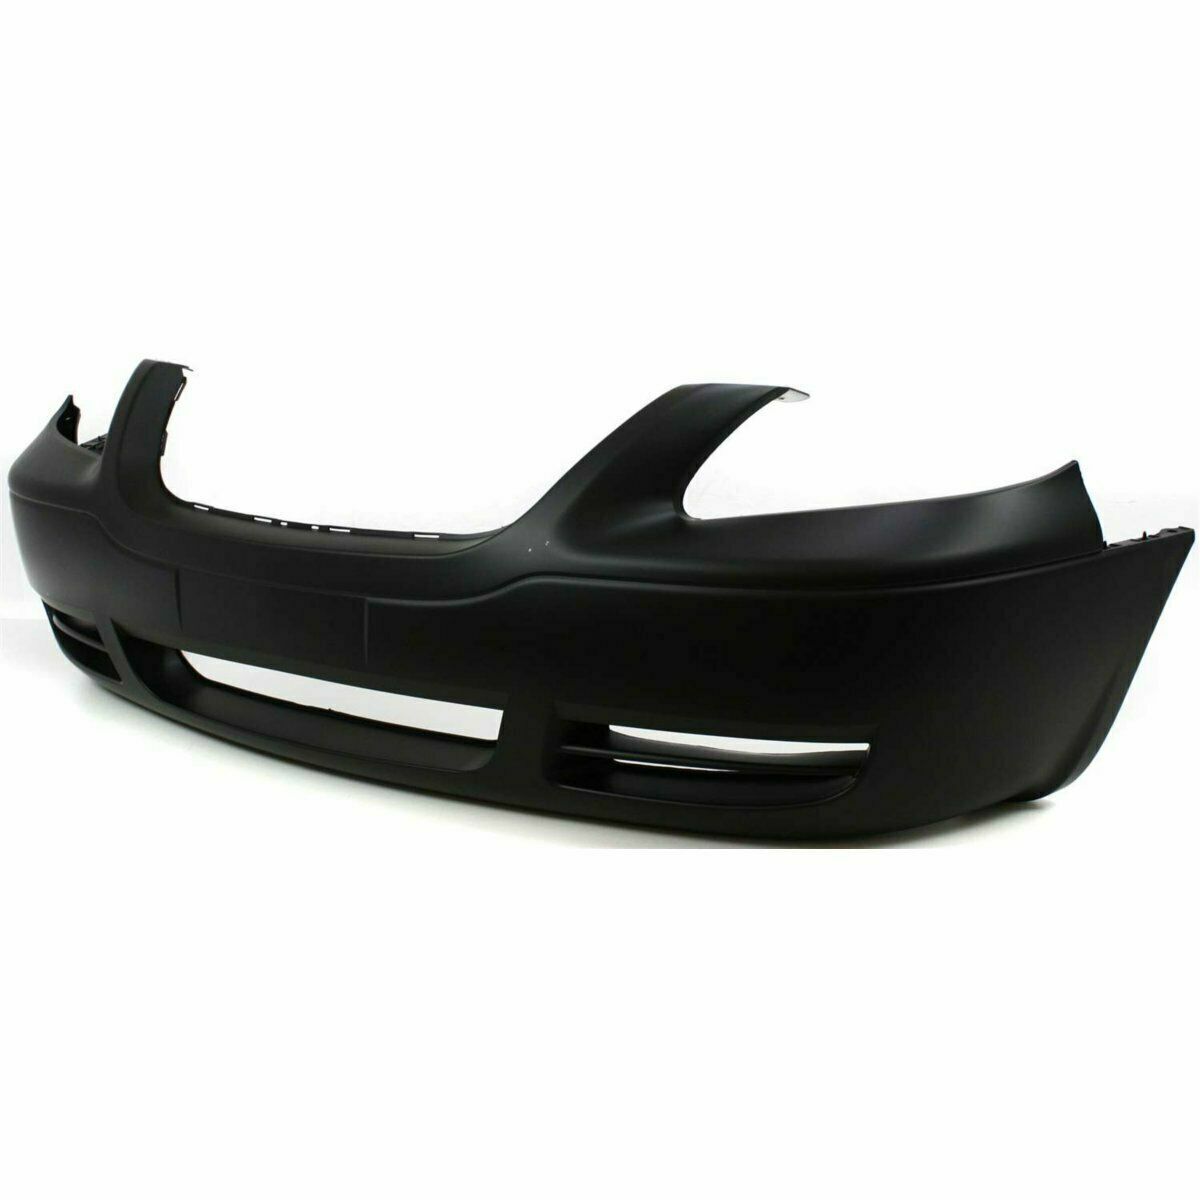 2005-2007 CHRYSLER Town & Country; Front Bumper Cover; 113"WB Painted to Match